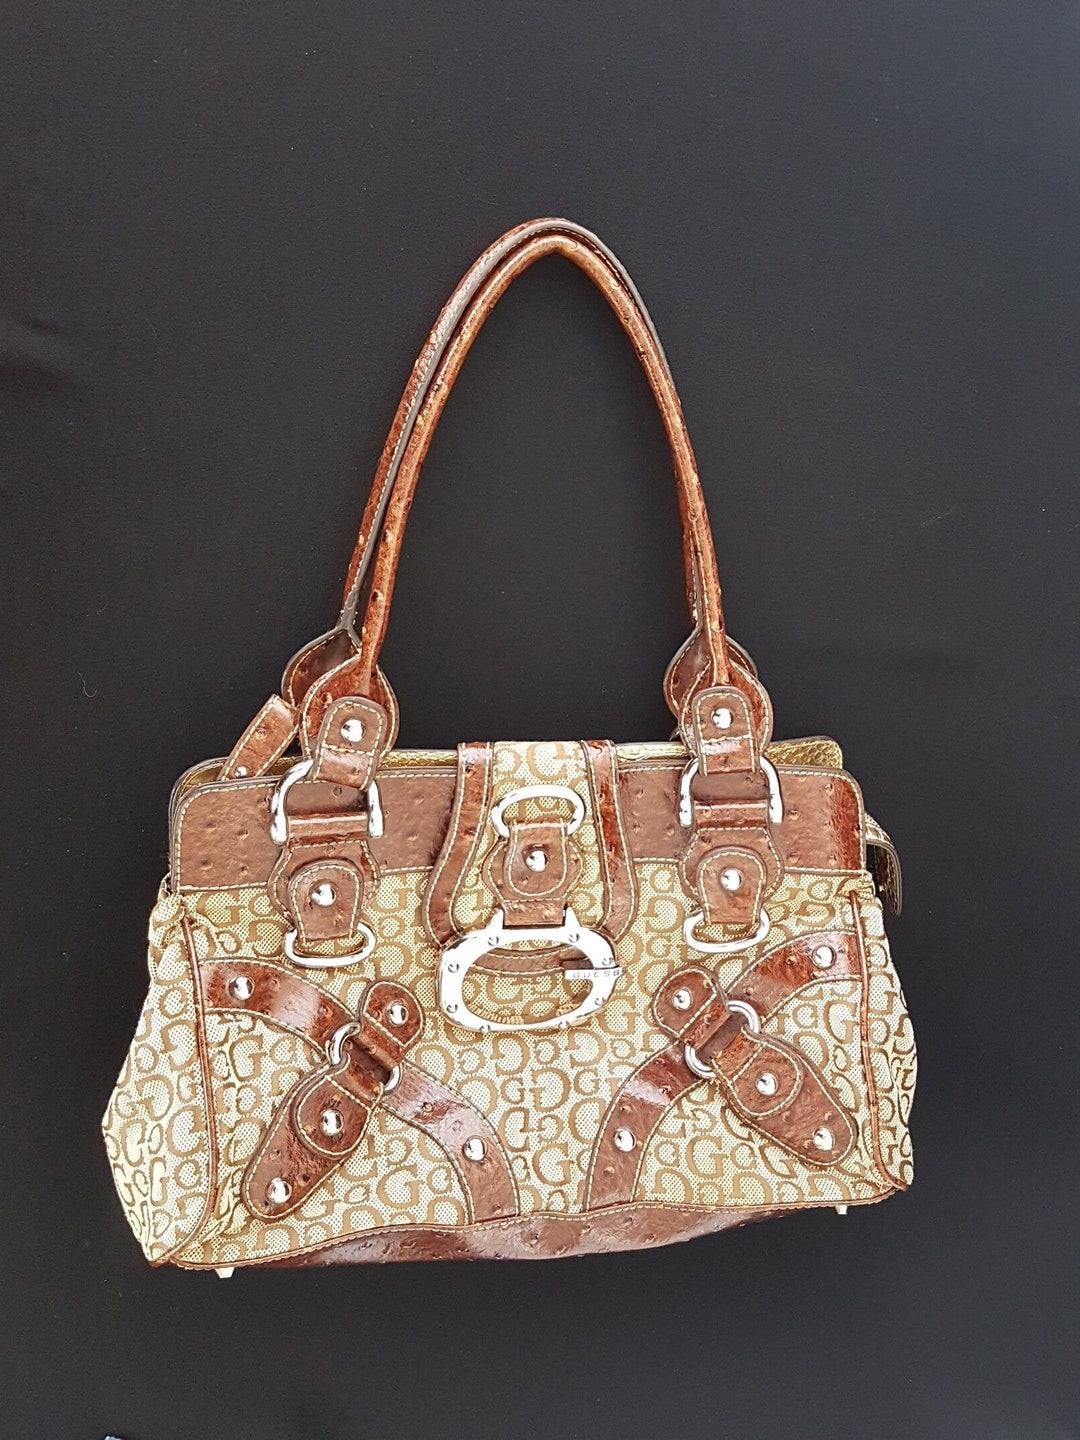 GUESS Baguette Bag, Brown Faux Ostrich Leather With Monogram, Vintage ...